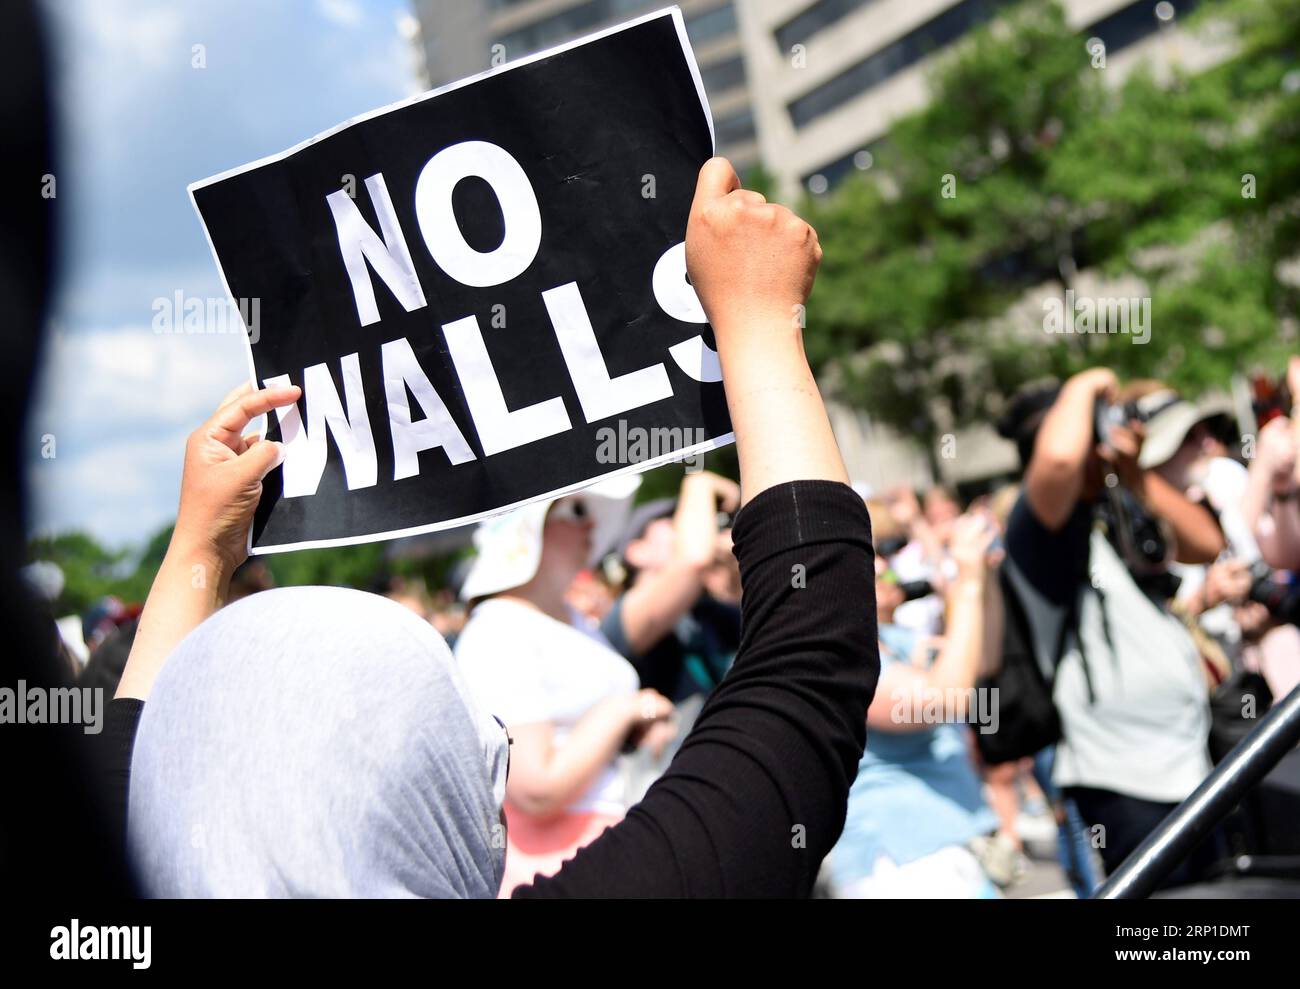 (180628) -- WASHINGTON, June 28, 2018 -- People gather to protest against U.S. President Donald Trump s immigration policies at Freedom Plaza in Washington D.C., the United States, on June 28, 2018. ) U.S.-WASHINGTON D.C.-IMMIGRATION POLICIES-PROTEST YangxChenglin PUBLICATIONxNOTxINxCHN Stock Photo